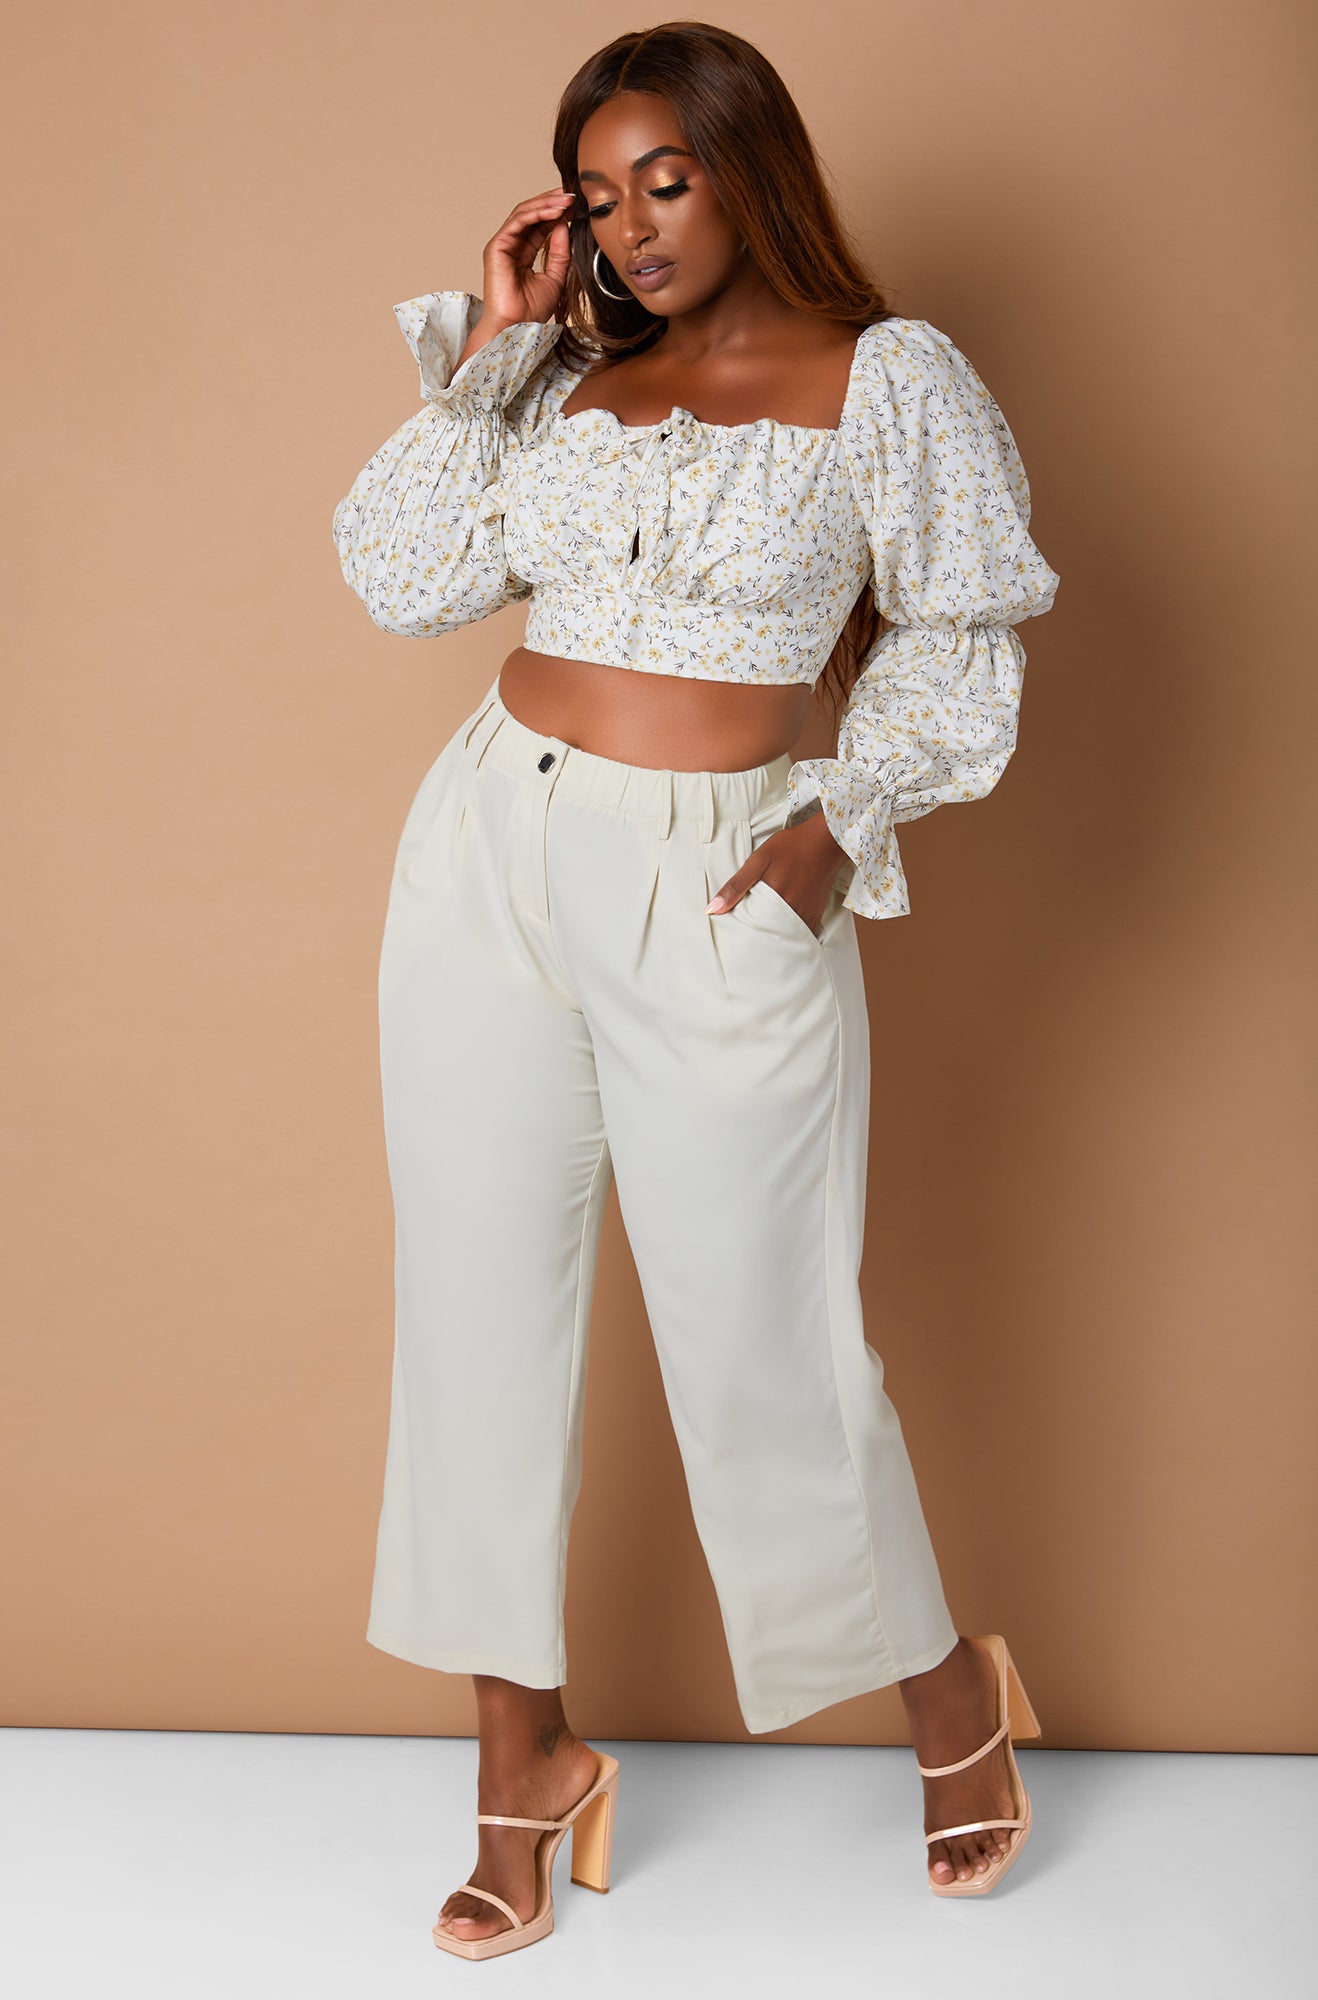 White Denise Mercedes X REBDOLLS Destined For You Tie Front Tiered Sleeve Peasant Crop Top Plus Sizes